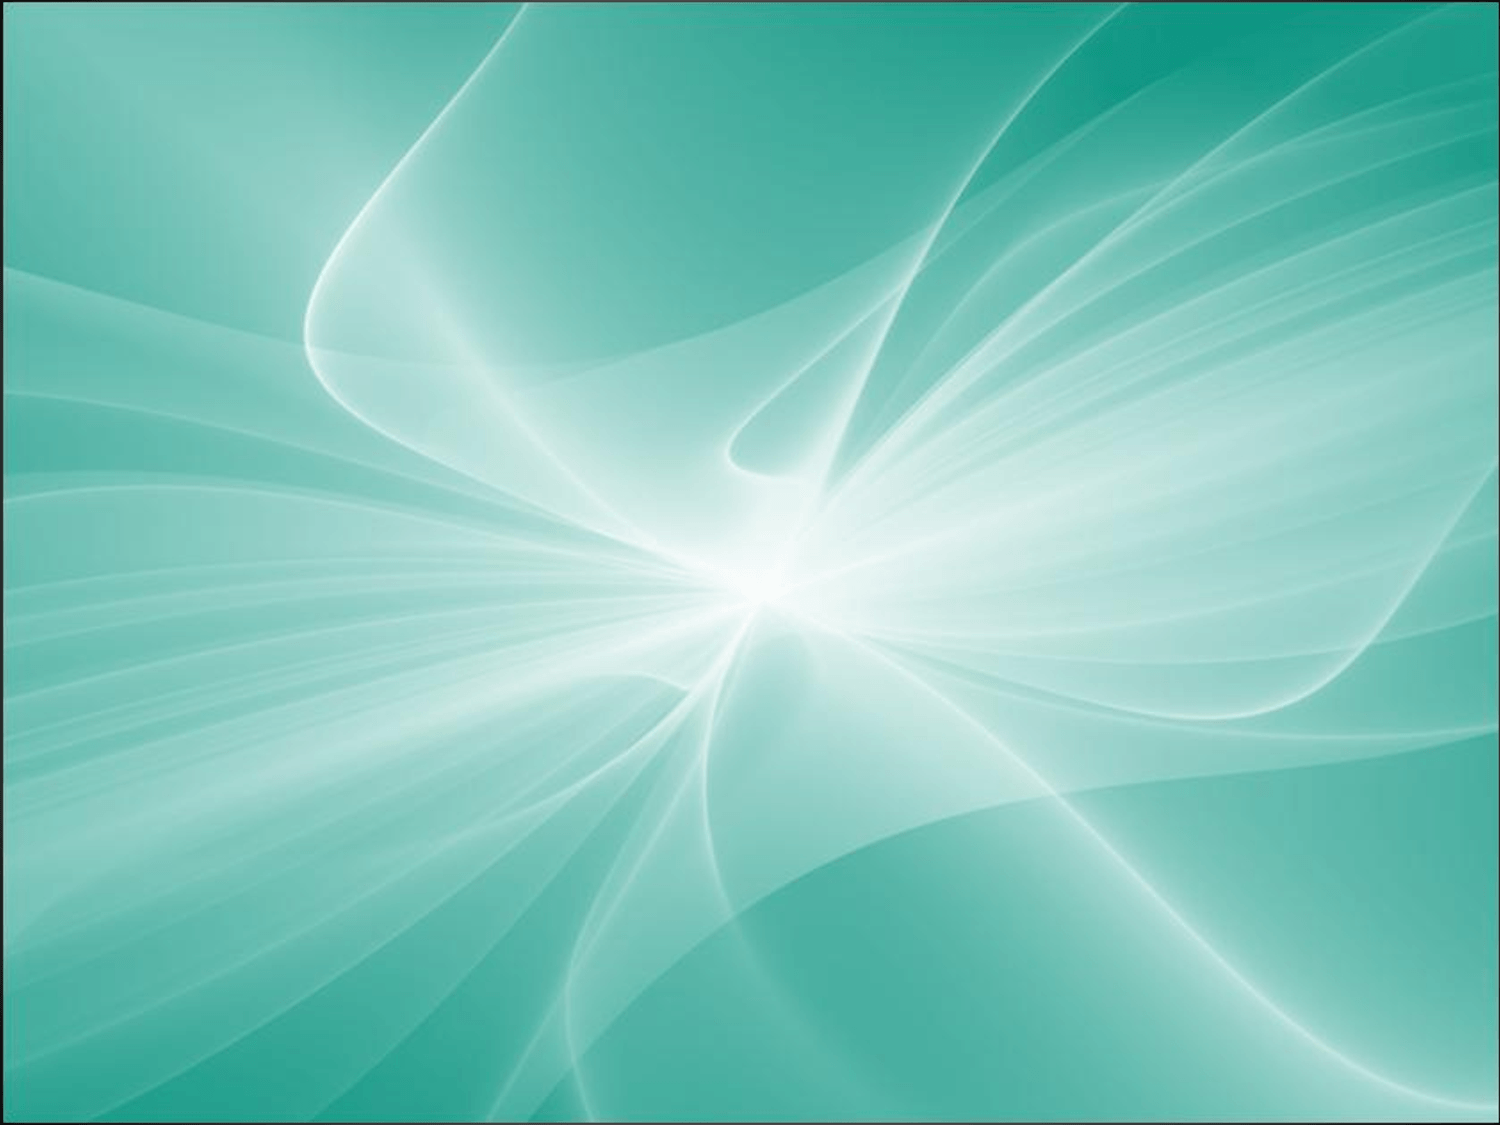 Teal Powerpoint Background Wallpaper HD 07317